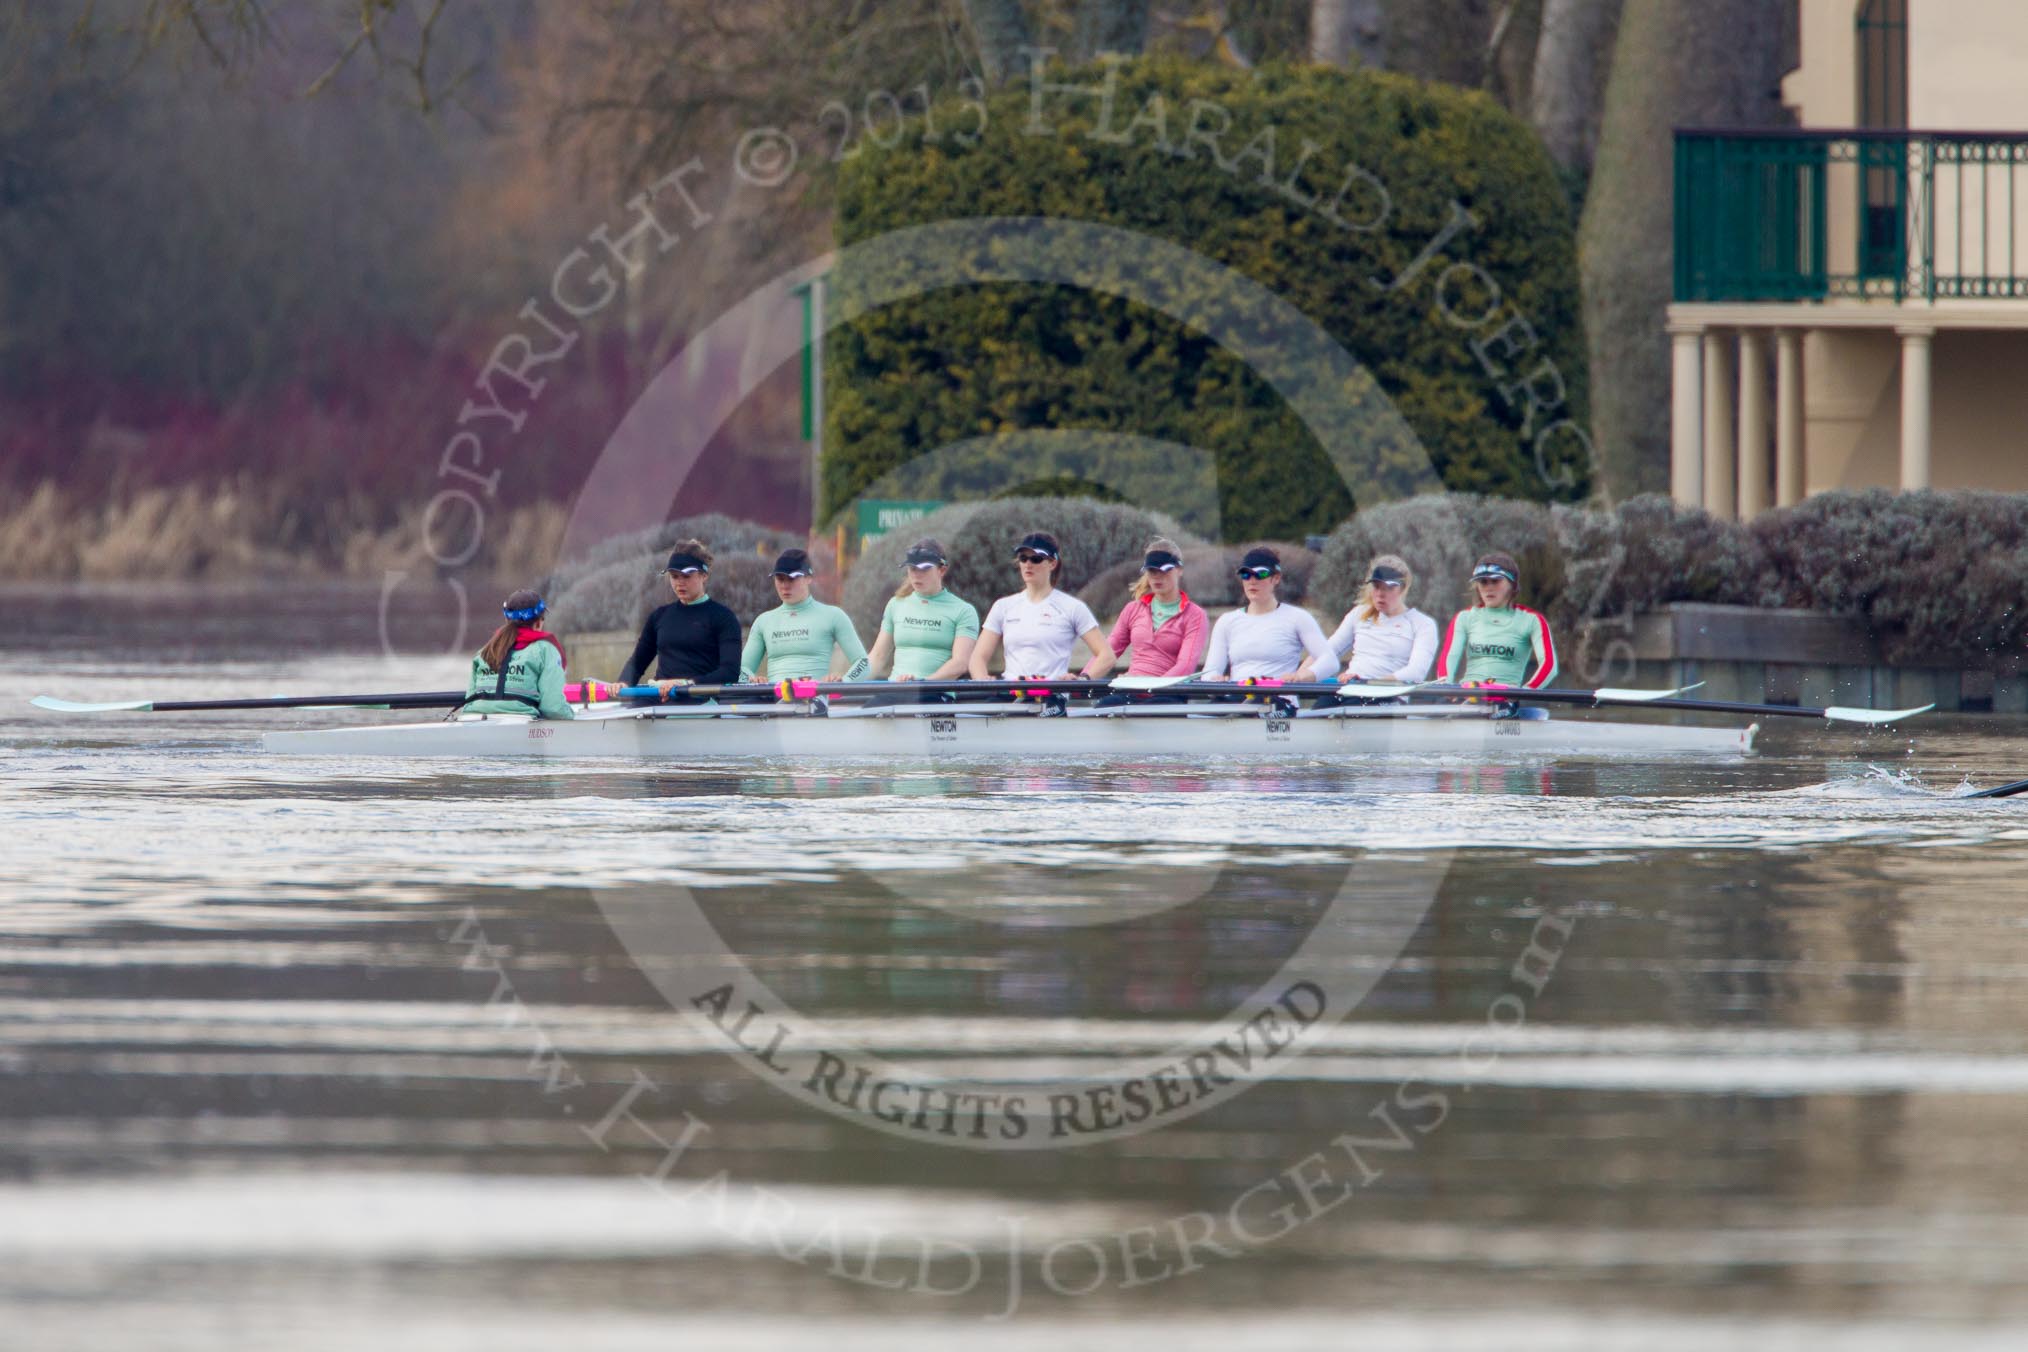 The Boat Race season 2013 - CUWBC training: The CUWBC Blue Boat in front of Temple Island: Cox Esther Momcilovic, stroke Holly Game, 7 Emily Day, 6 Claire Watkins, 5 Vicky Shaw, 4  Jessica Denman, 3 Melissa Wilson, 2 Fay Sandford, and bow Caroline Reid..
River Thames near Remenham,
Henley-on-Thames,
Oxfordshire,
United Kingdom,
on 19 March 2013 at 15:33, image #45